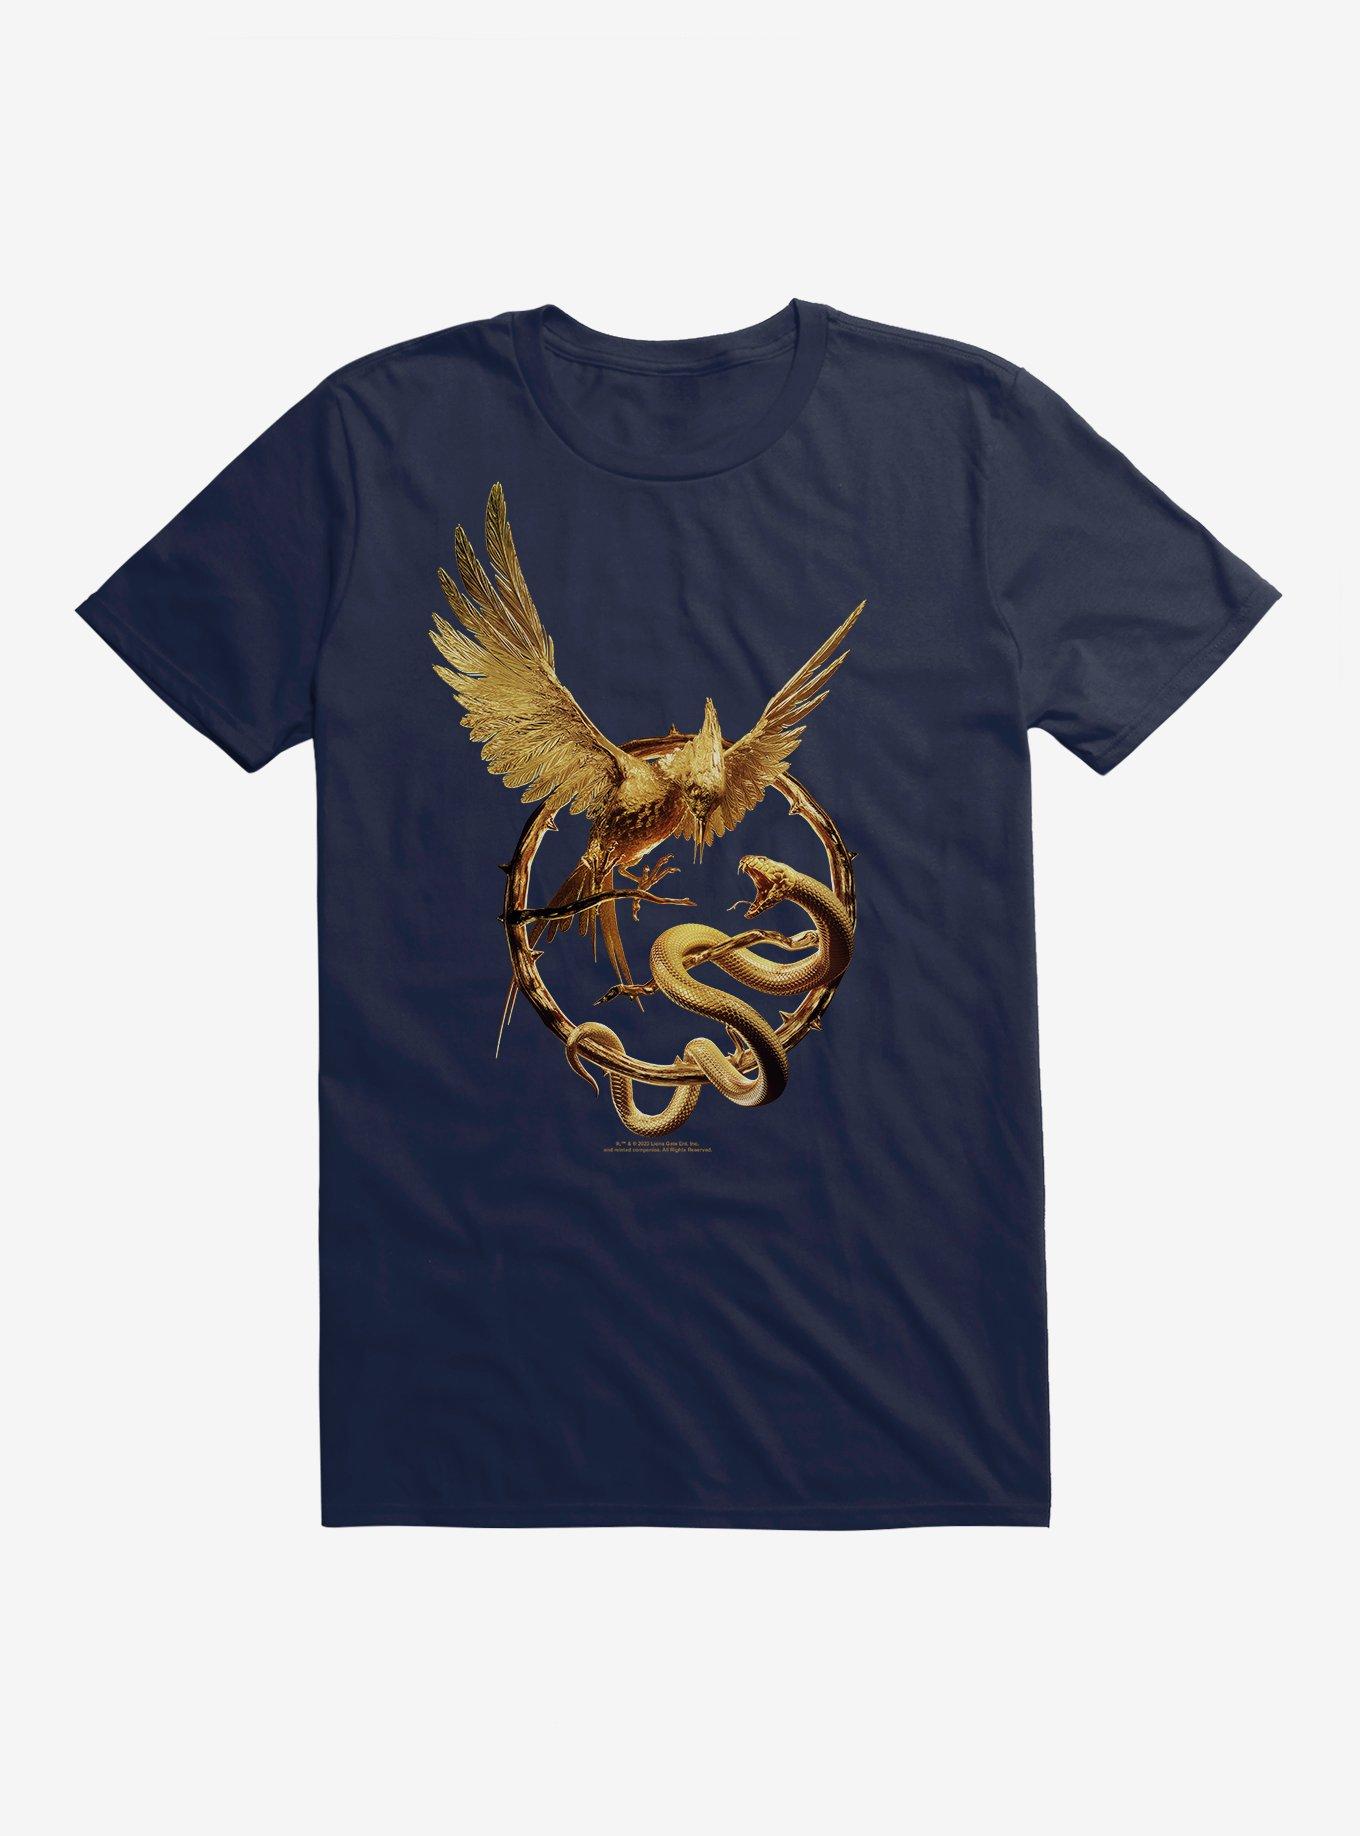 Of　Snakes　The　T-Shirt　Hunger　BoxLunch　Songbirds　Games:　Ballad　And